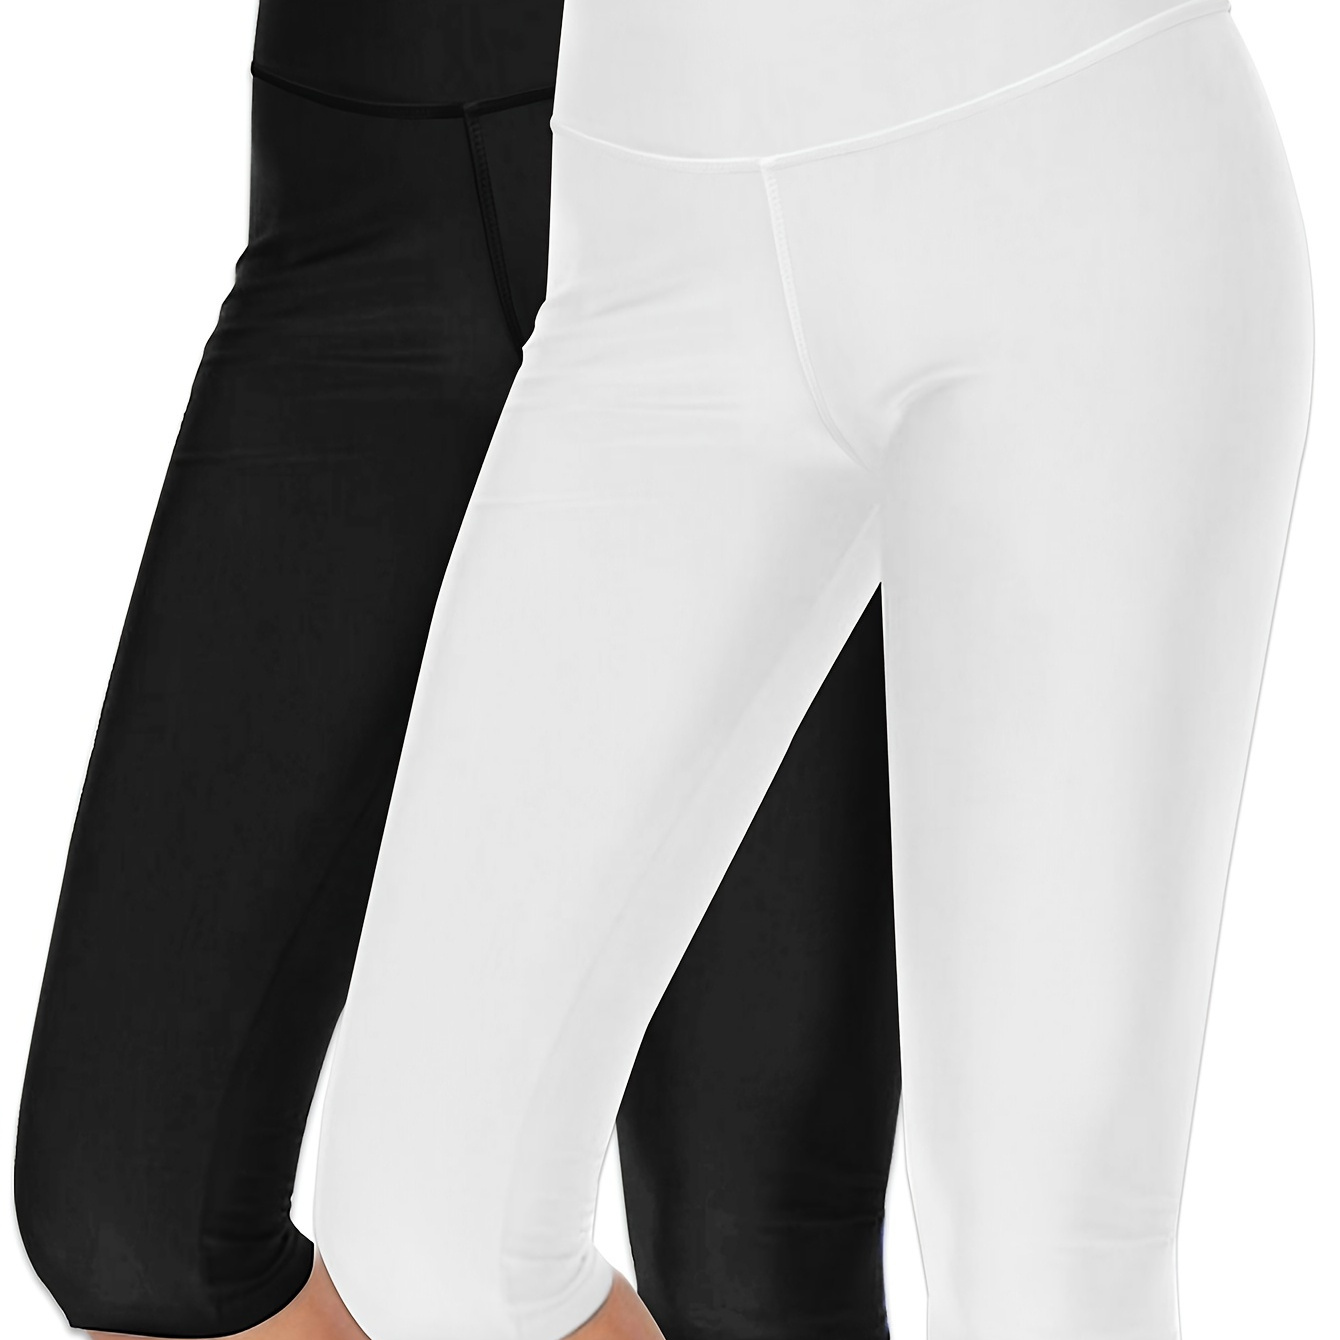 

2-pack Women's Athletic Capri Pants, Stretchy Fitness Yoga Leggings, Fashionable Outdoor Sports Running Gear